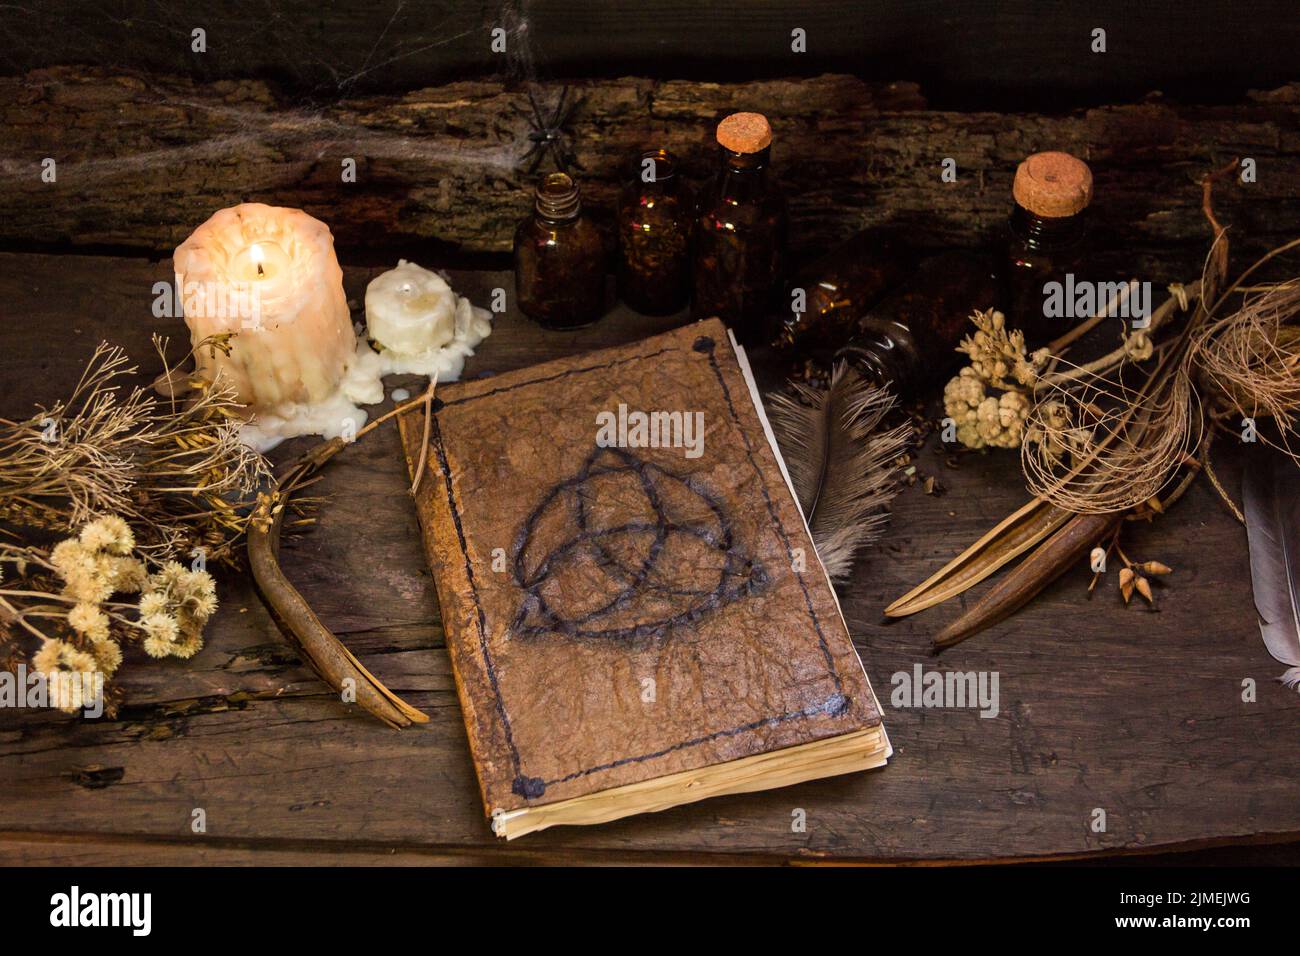 Set of objects symbols of esoteric rituals Stock Photo